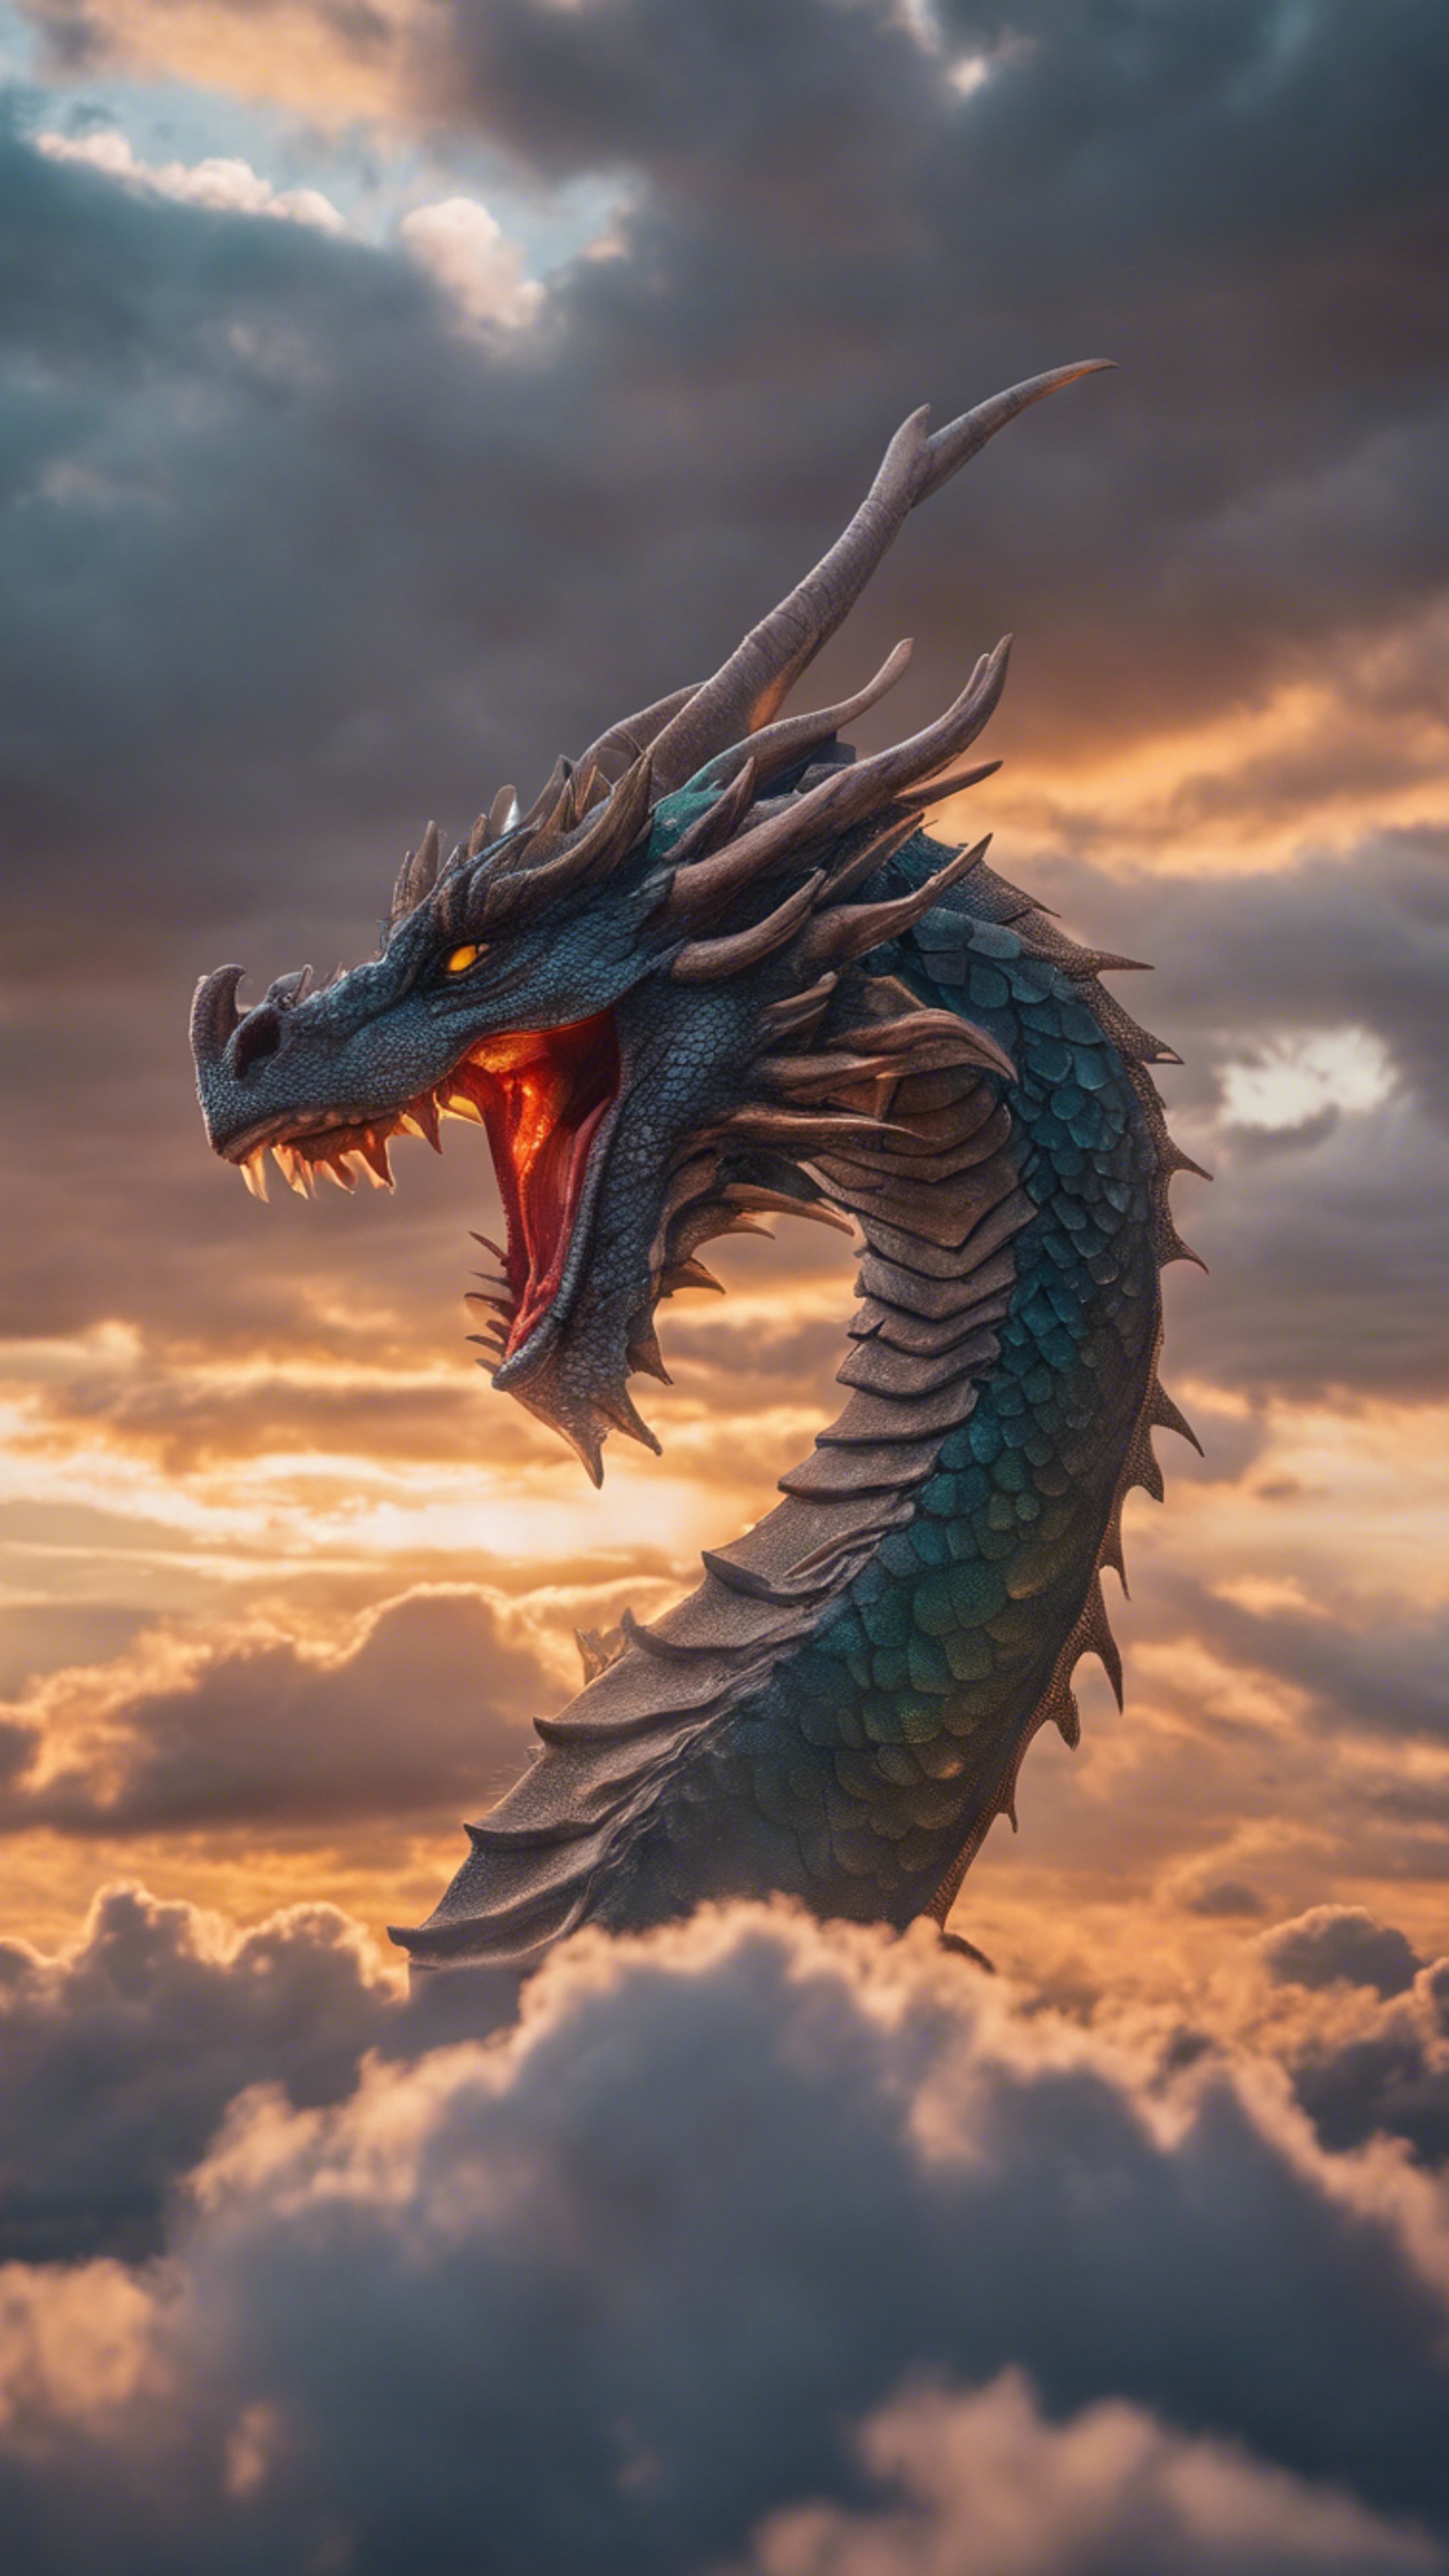 A dragon of pure light breaking through the clouds as the sun sets, its scales reflecting the vibrant colors of dusk. Kertas dinding[43b0d43f7e0c44e88acd]